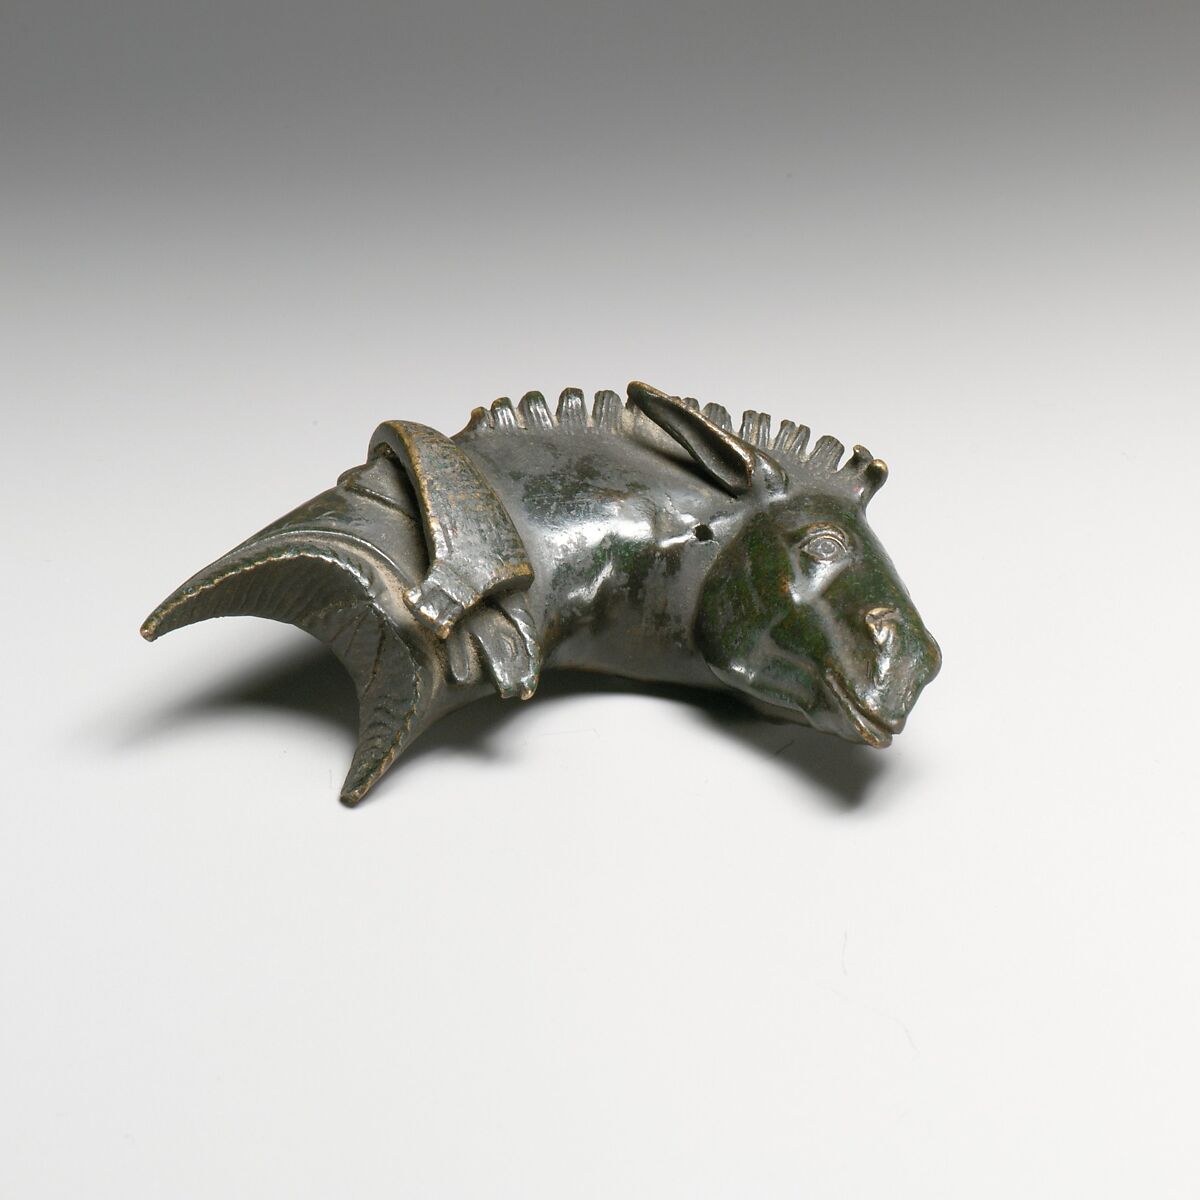 Bronze furniture attachment | Roman | Early Imperial | The Met